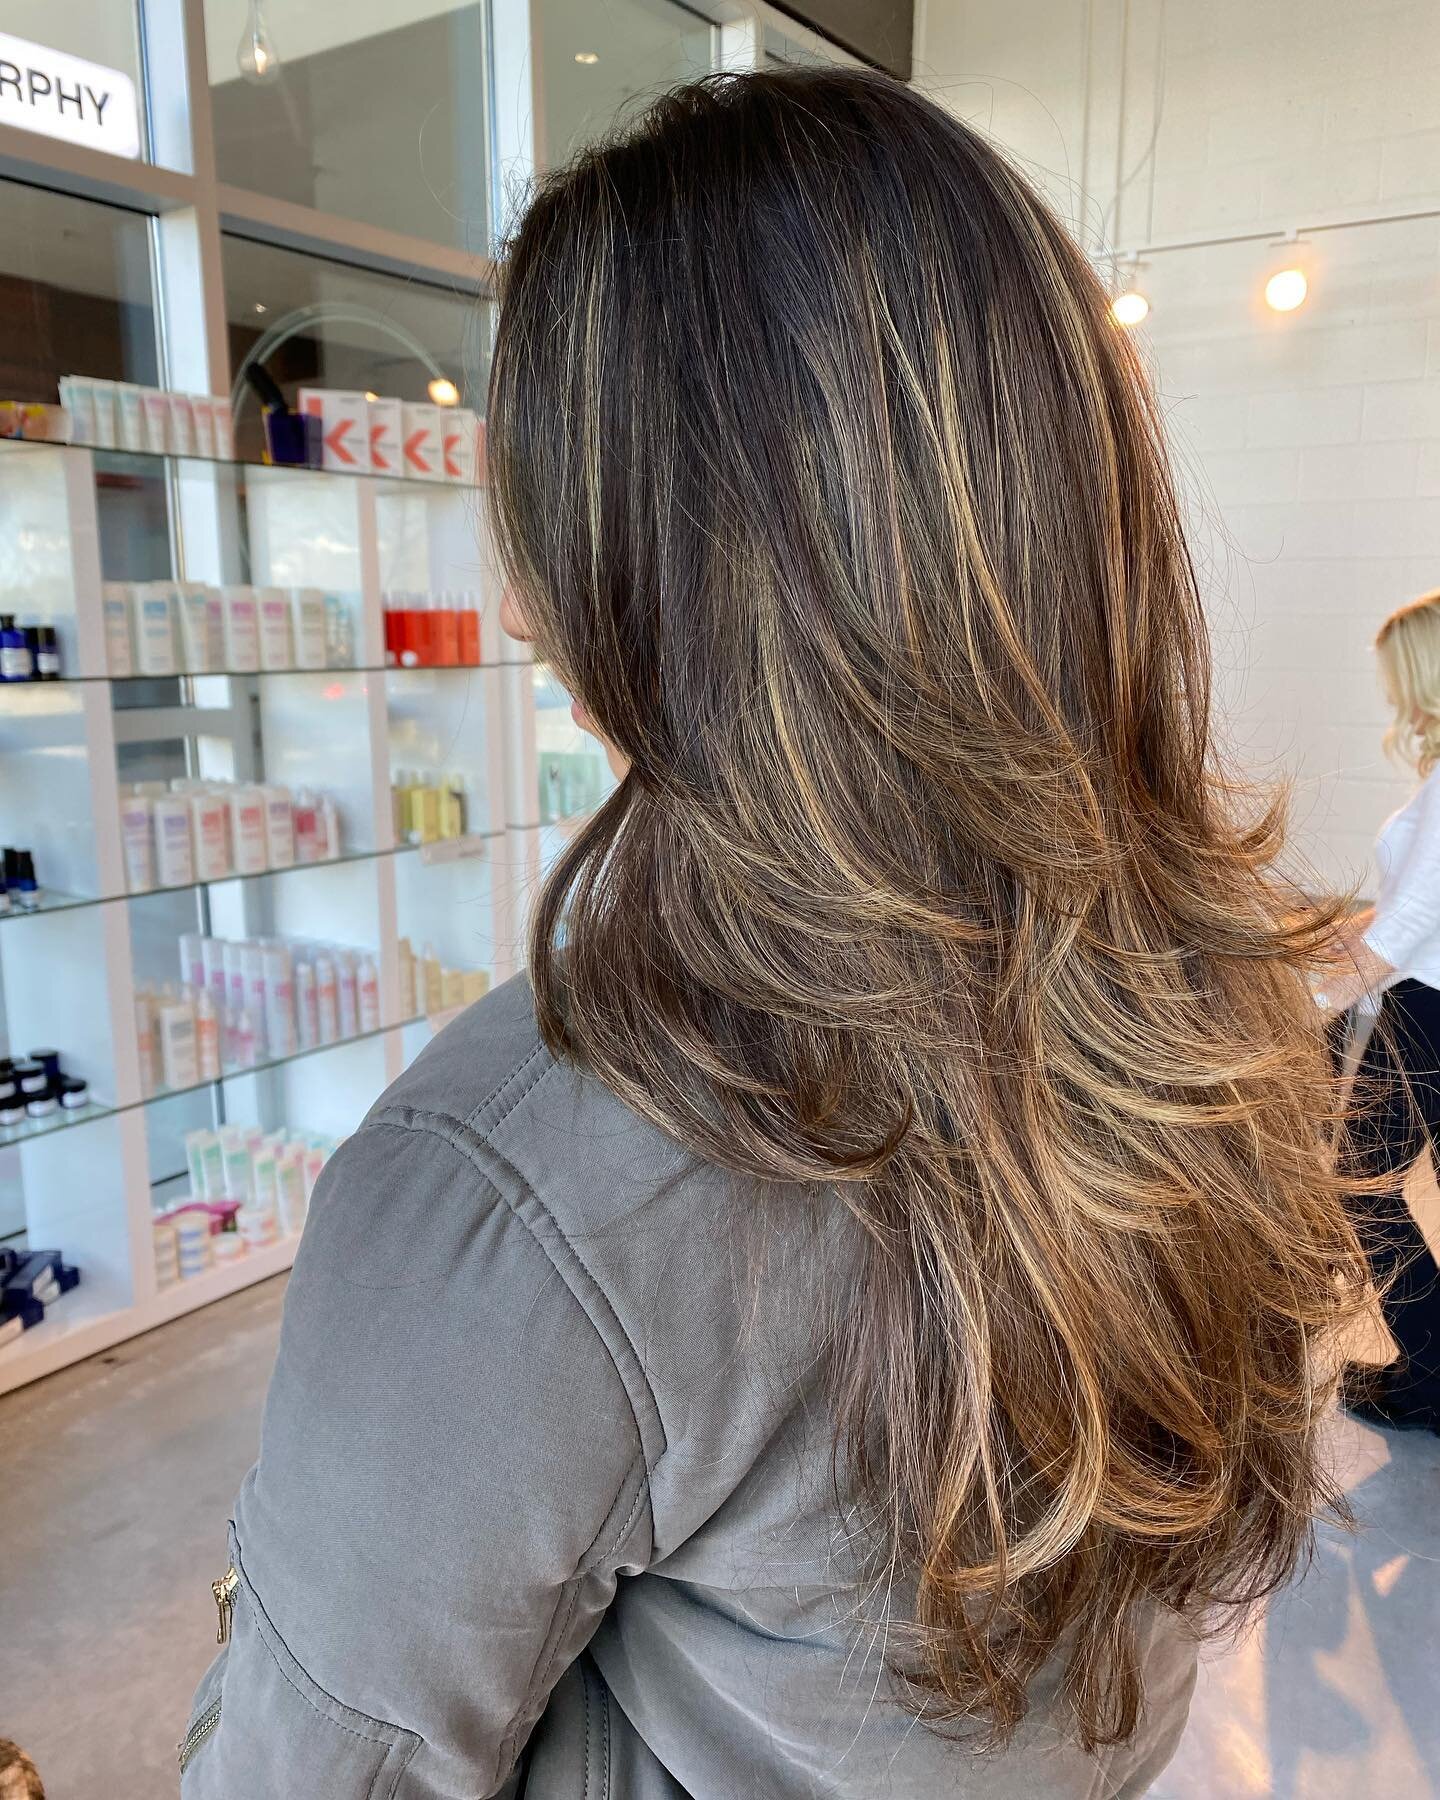 Sweet like honey 🍯 🐝 
Looking for something lived in? Get a balayage!! 
Hair artist- @sharzhair 
P.S. Swipe for before 👀
&bull;BOOK YOUR APPOINTMENT TODAY&bull;
.. www.thepurehairartistry.com
843-871-3898
&amp; @sharzhair @sarahsarezkyhair
@courtn